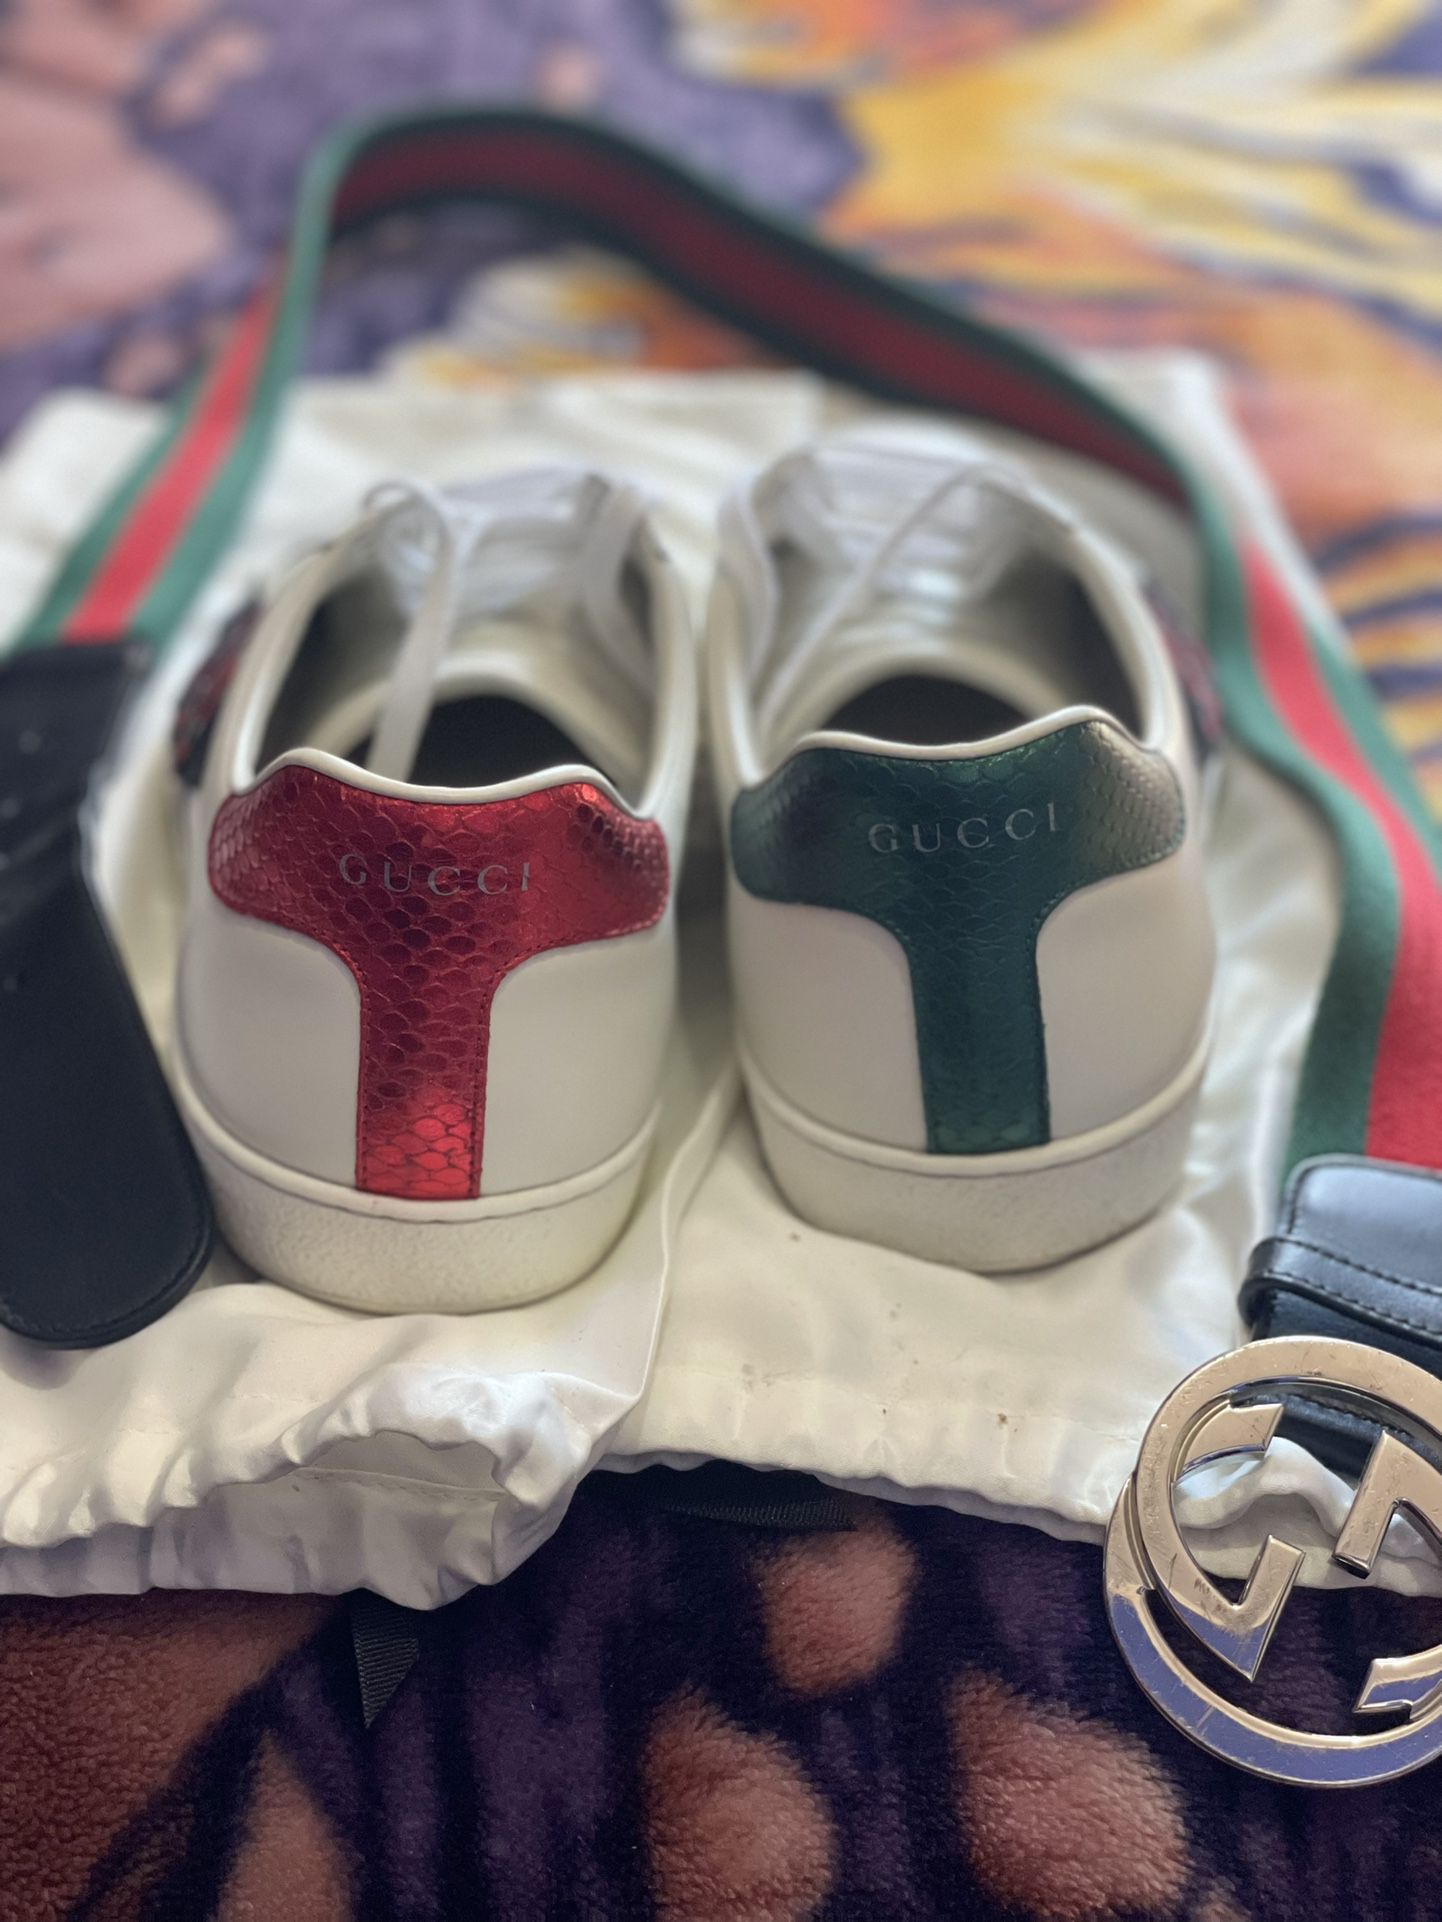 10.5, White Snake Gucci sneakers, Free Gucci Belt